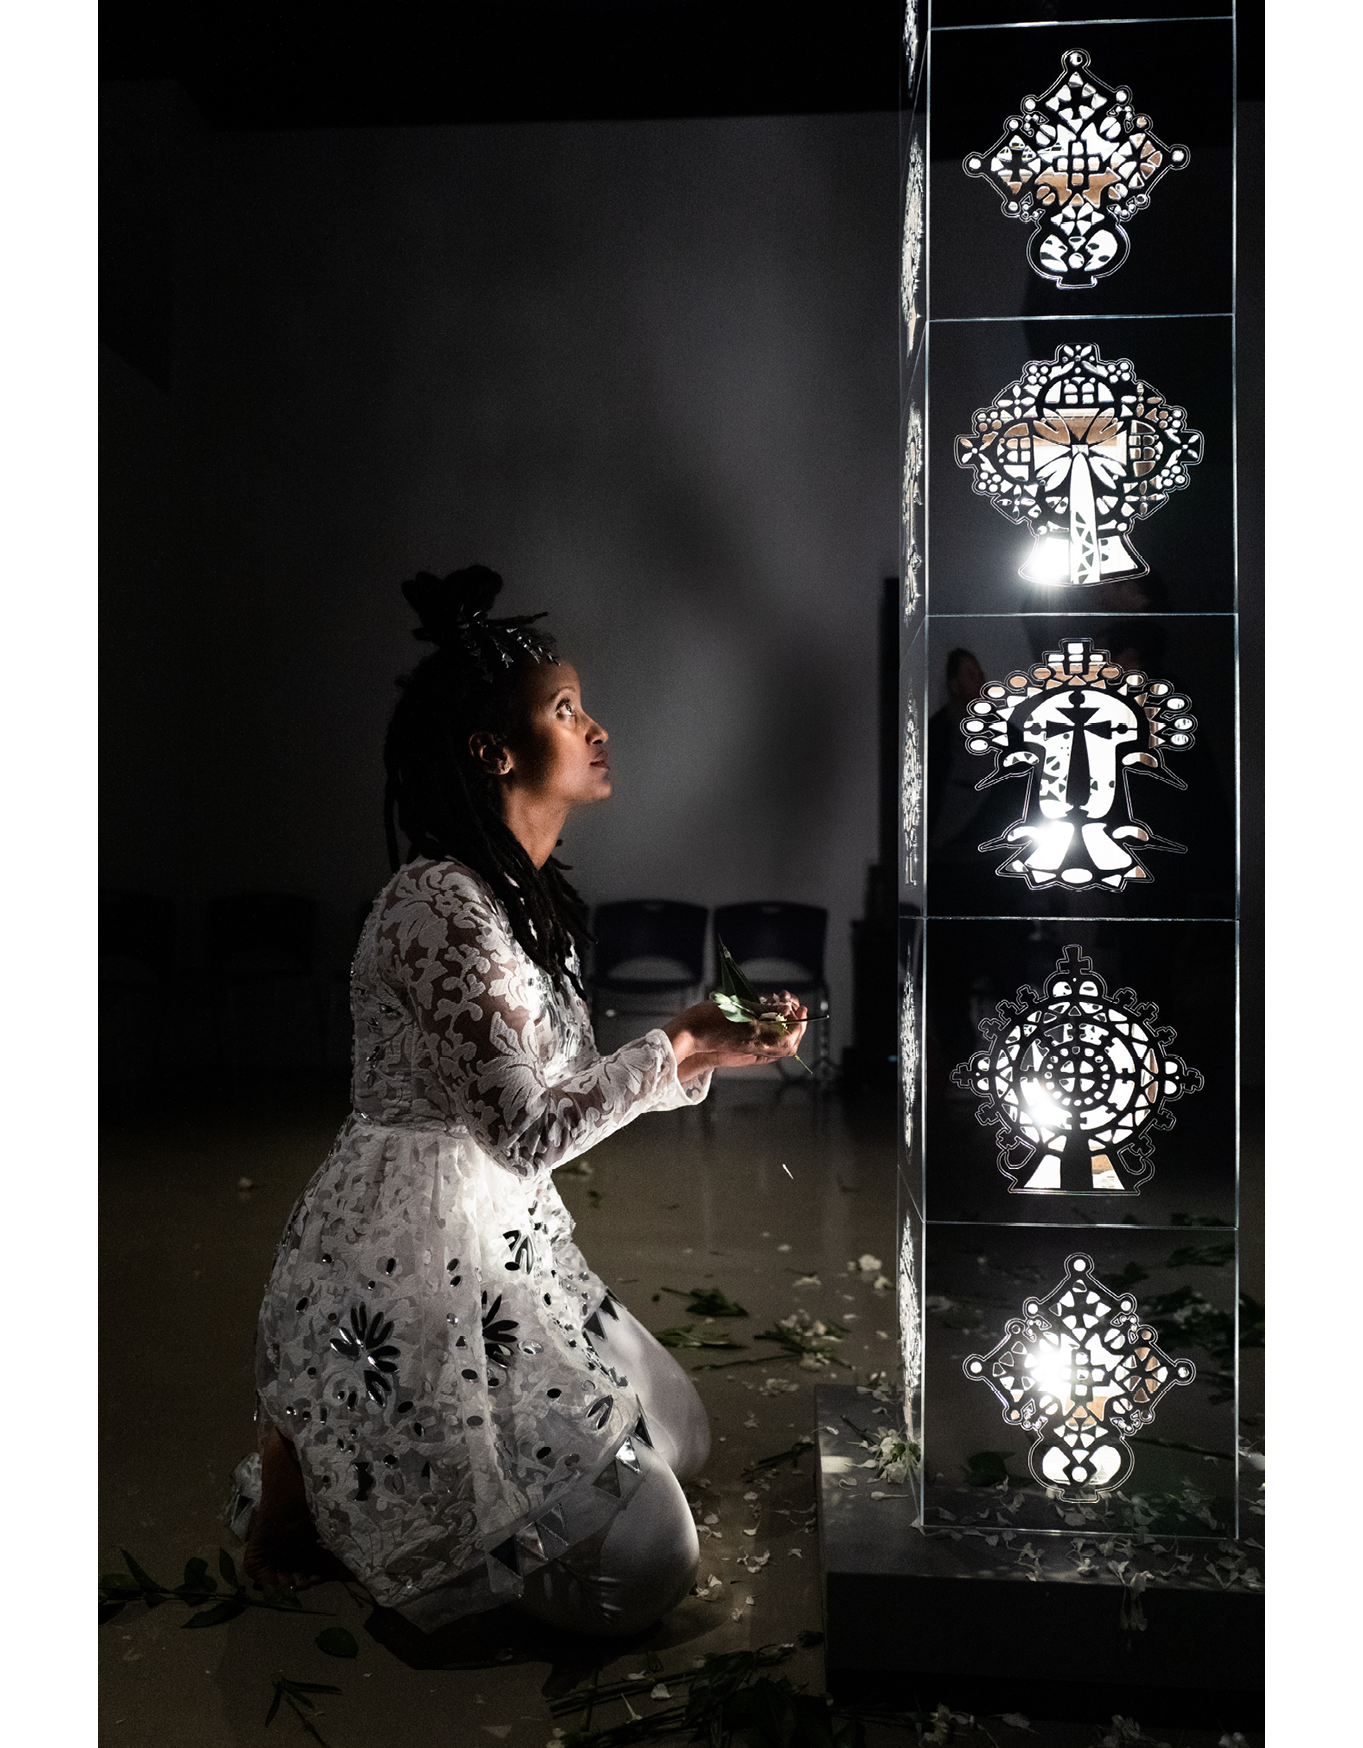 Image of a woman in a white flora lace dress kneels in front of a tall light sculpture with white flowers in her hands. The sculpture is a standing pillar with mirrored square segments. Each square segment of the pillar has abstract cutouts and designs. There is light shining through the cutouts. There are white flower petals on the floor around the sculpture and the woman.